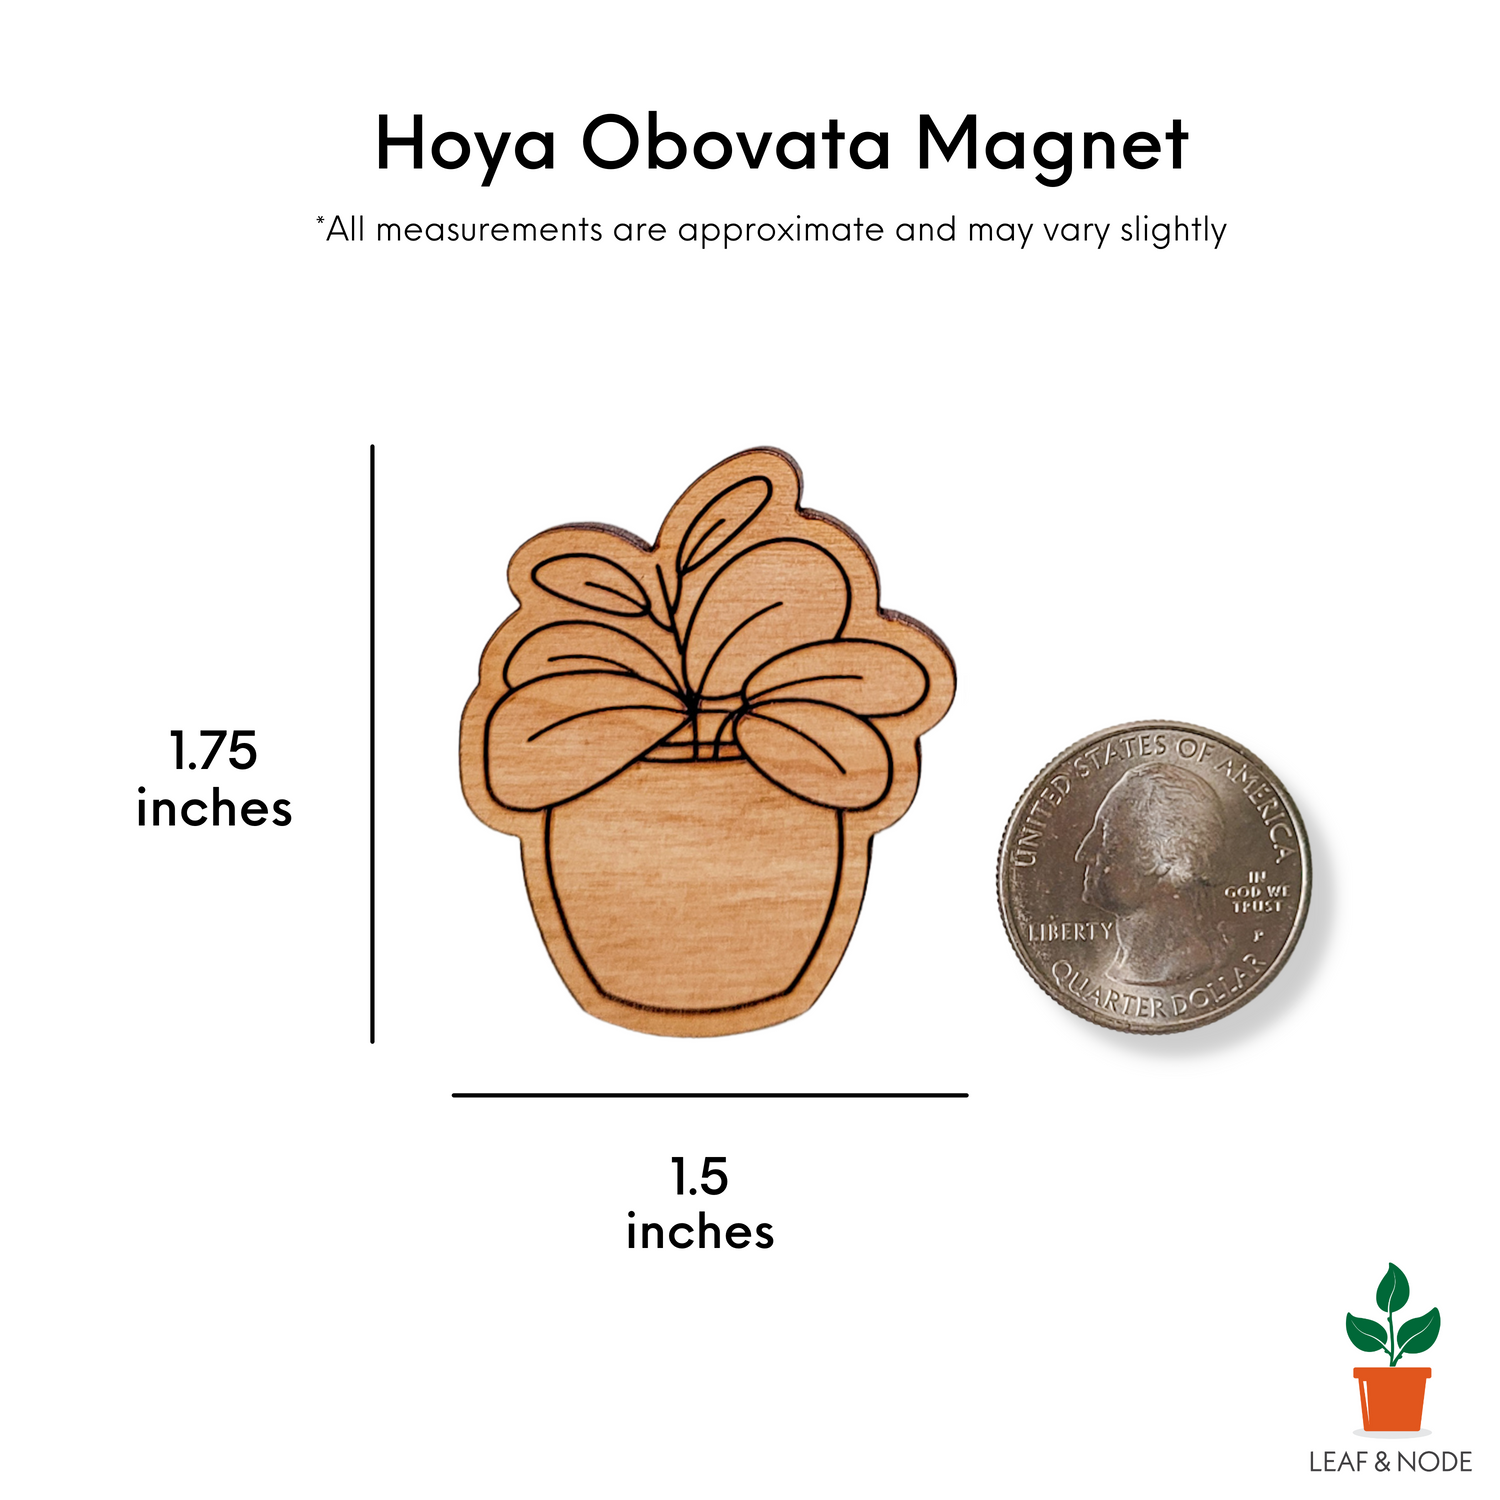 Engraved hoya obovata magnet on white background with size information that matches the written product description.